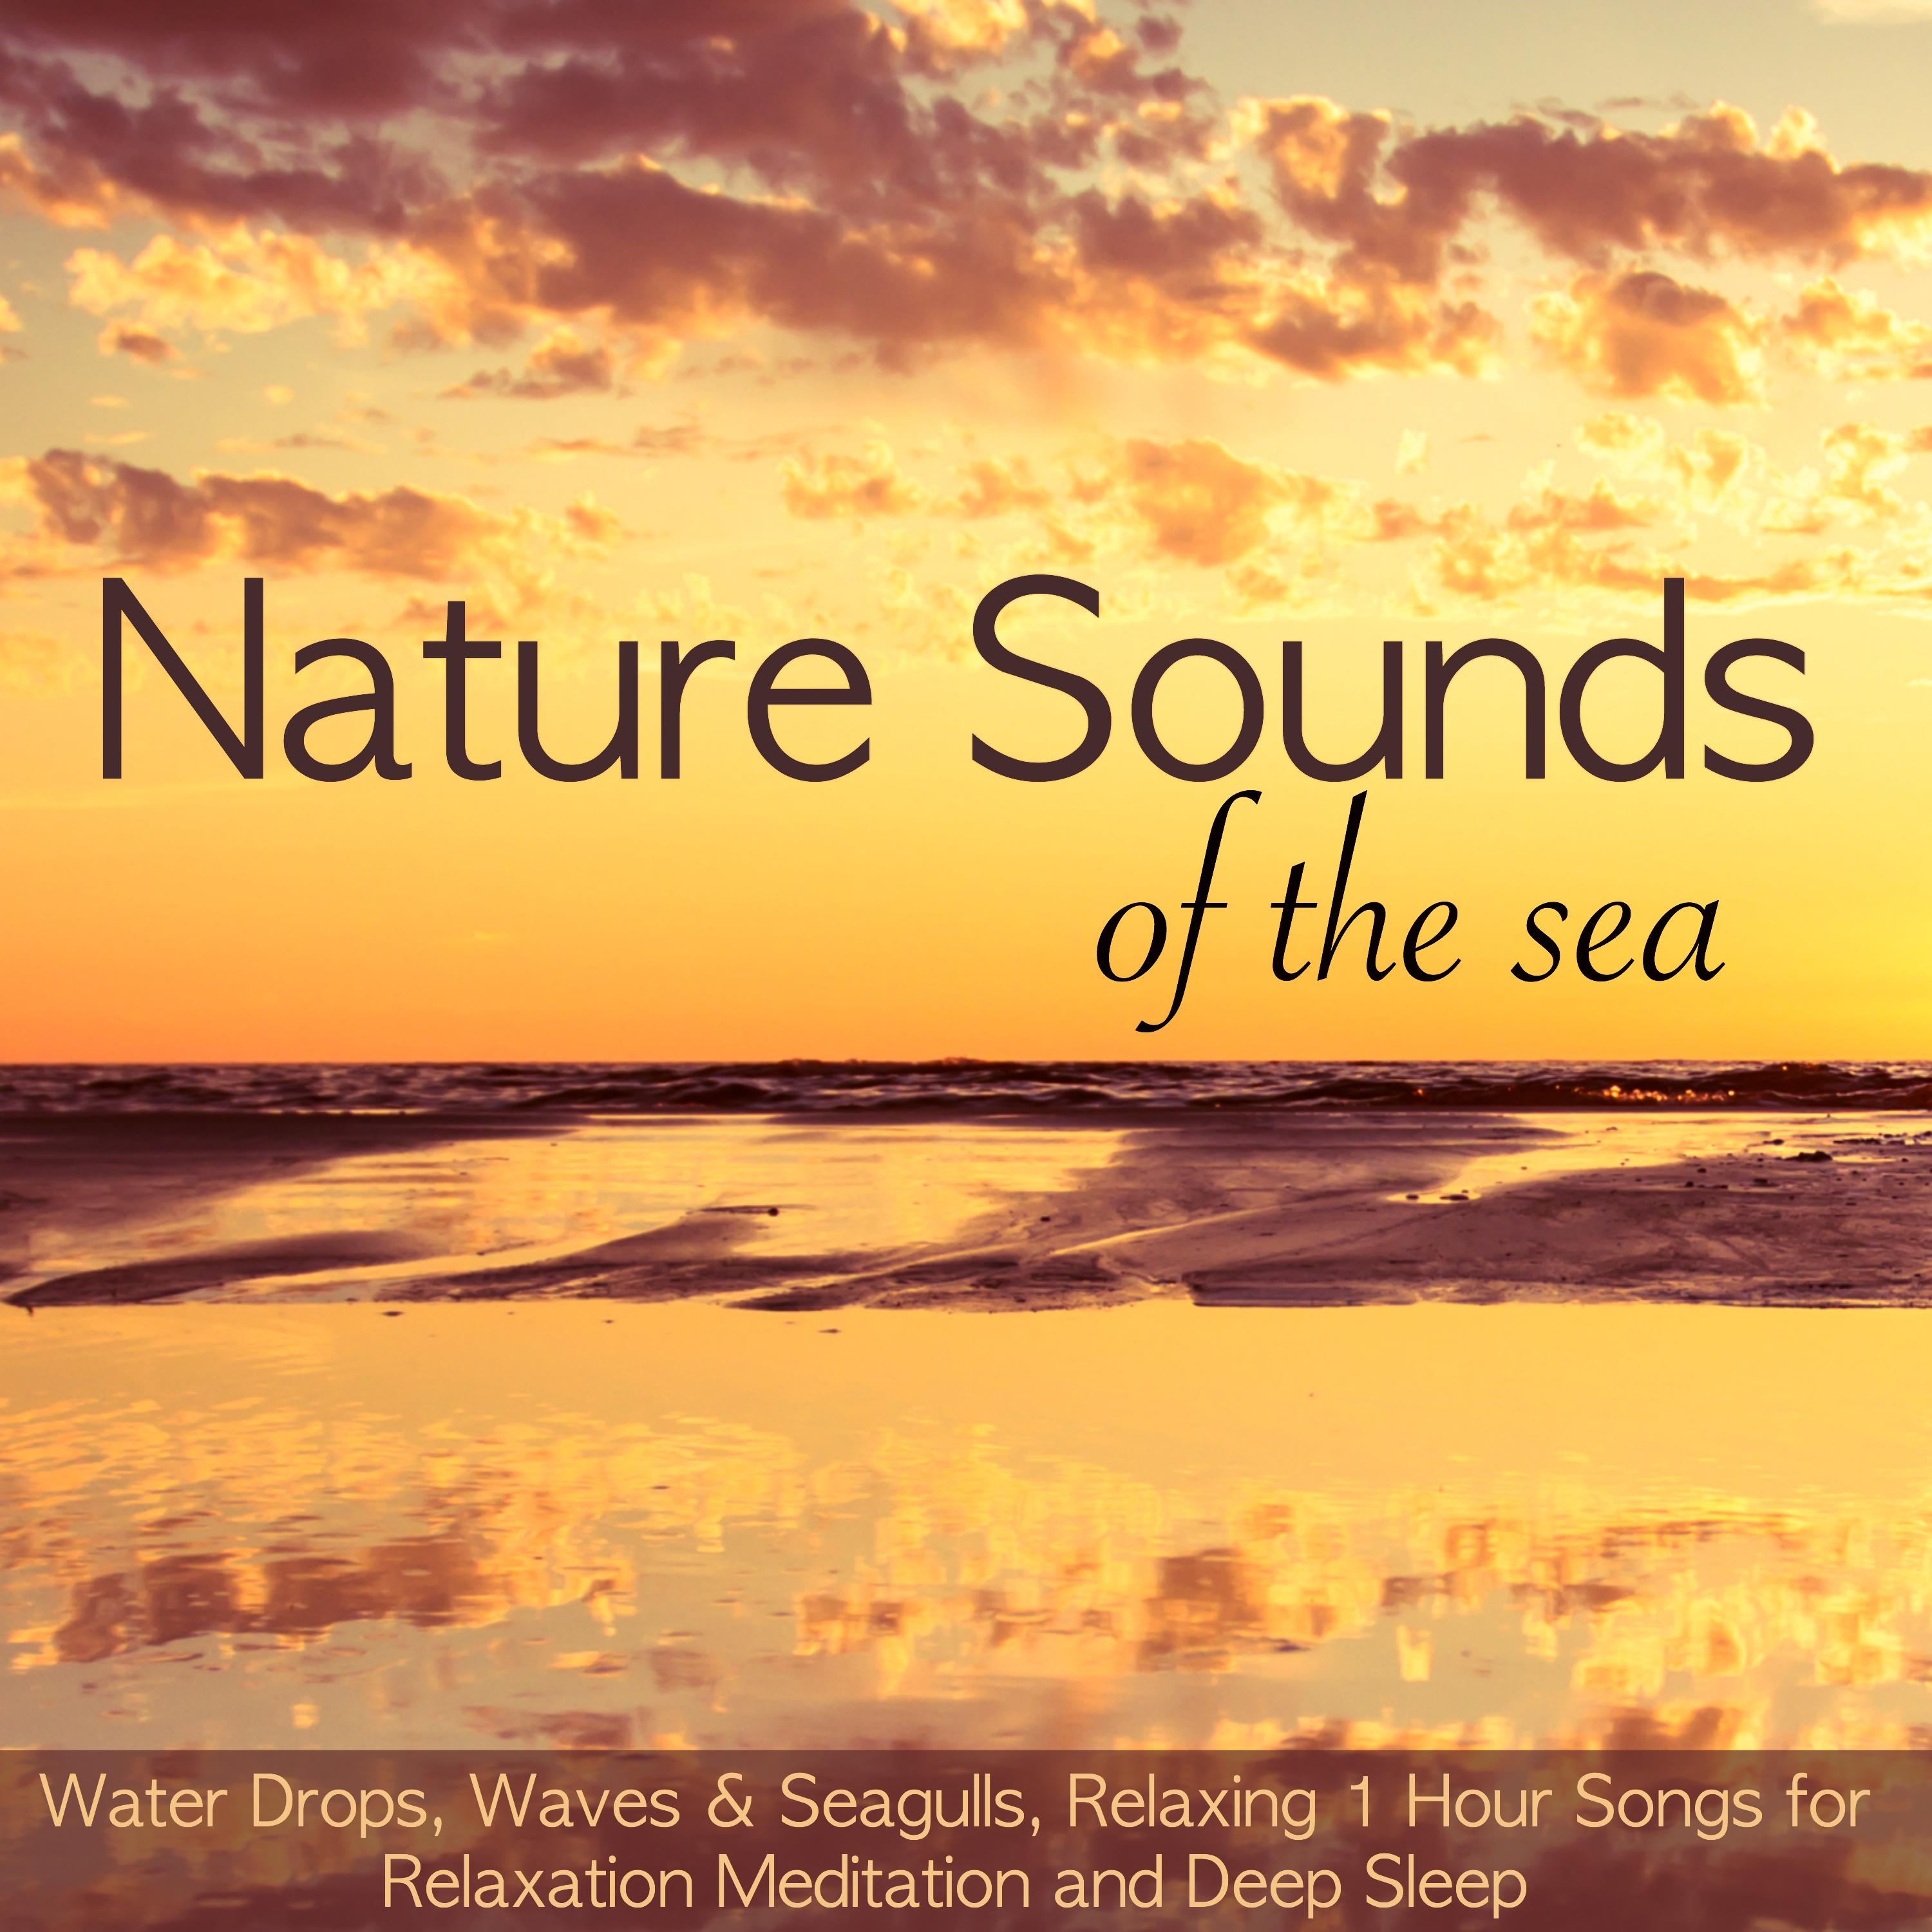 Beach Music for Healing - Wales and Water Sounds Relaxing Music for Meditation and Sleep